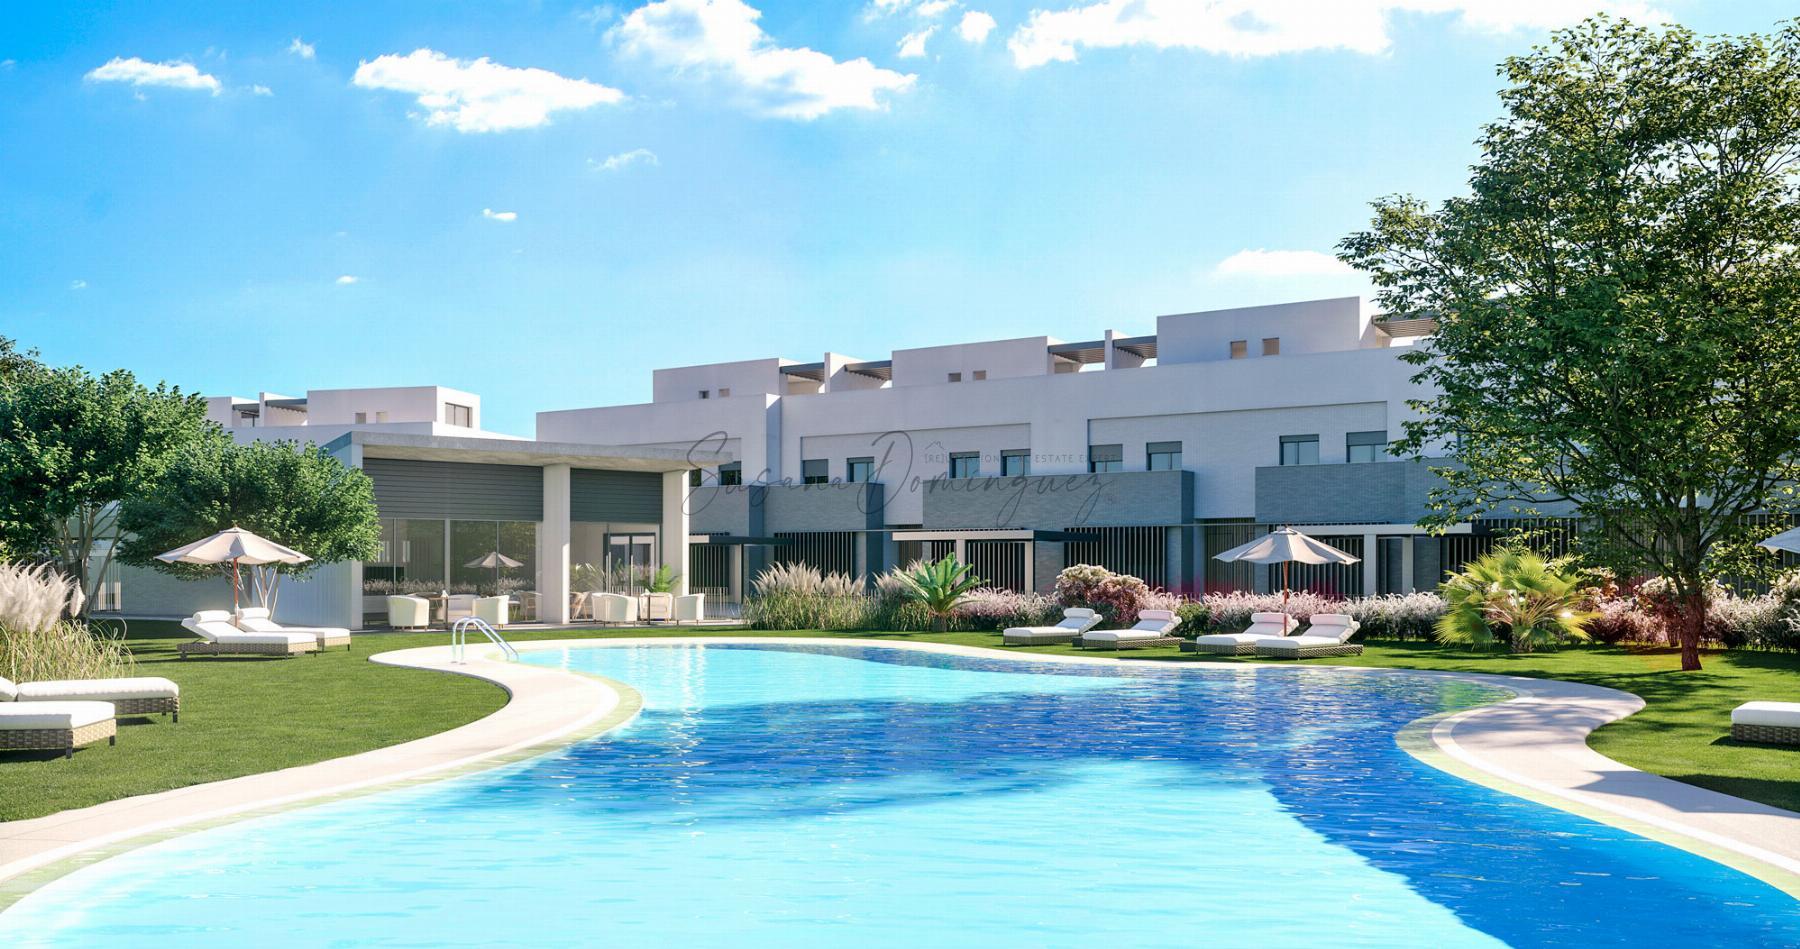 For sale of new build in San Roque